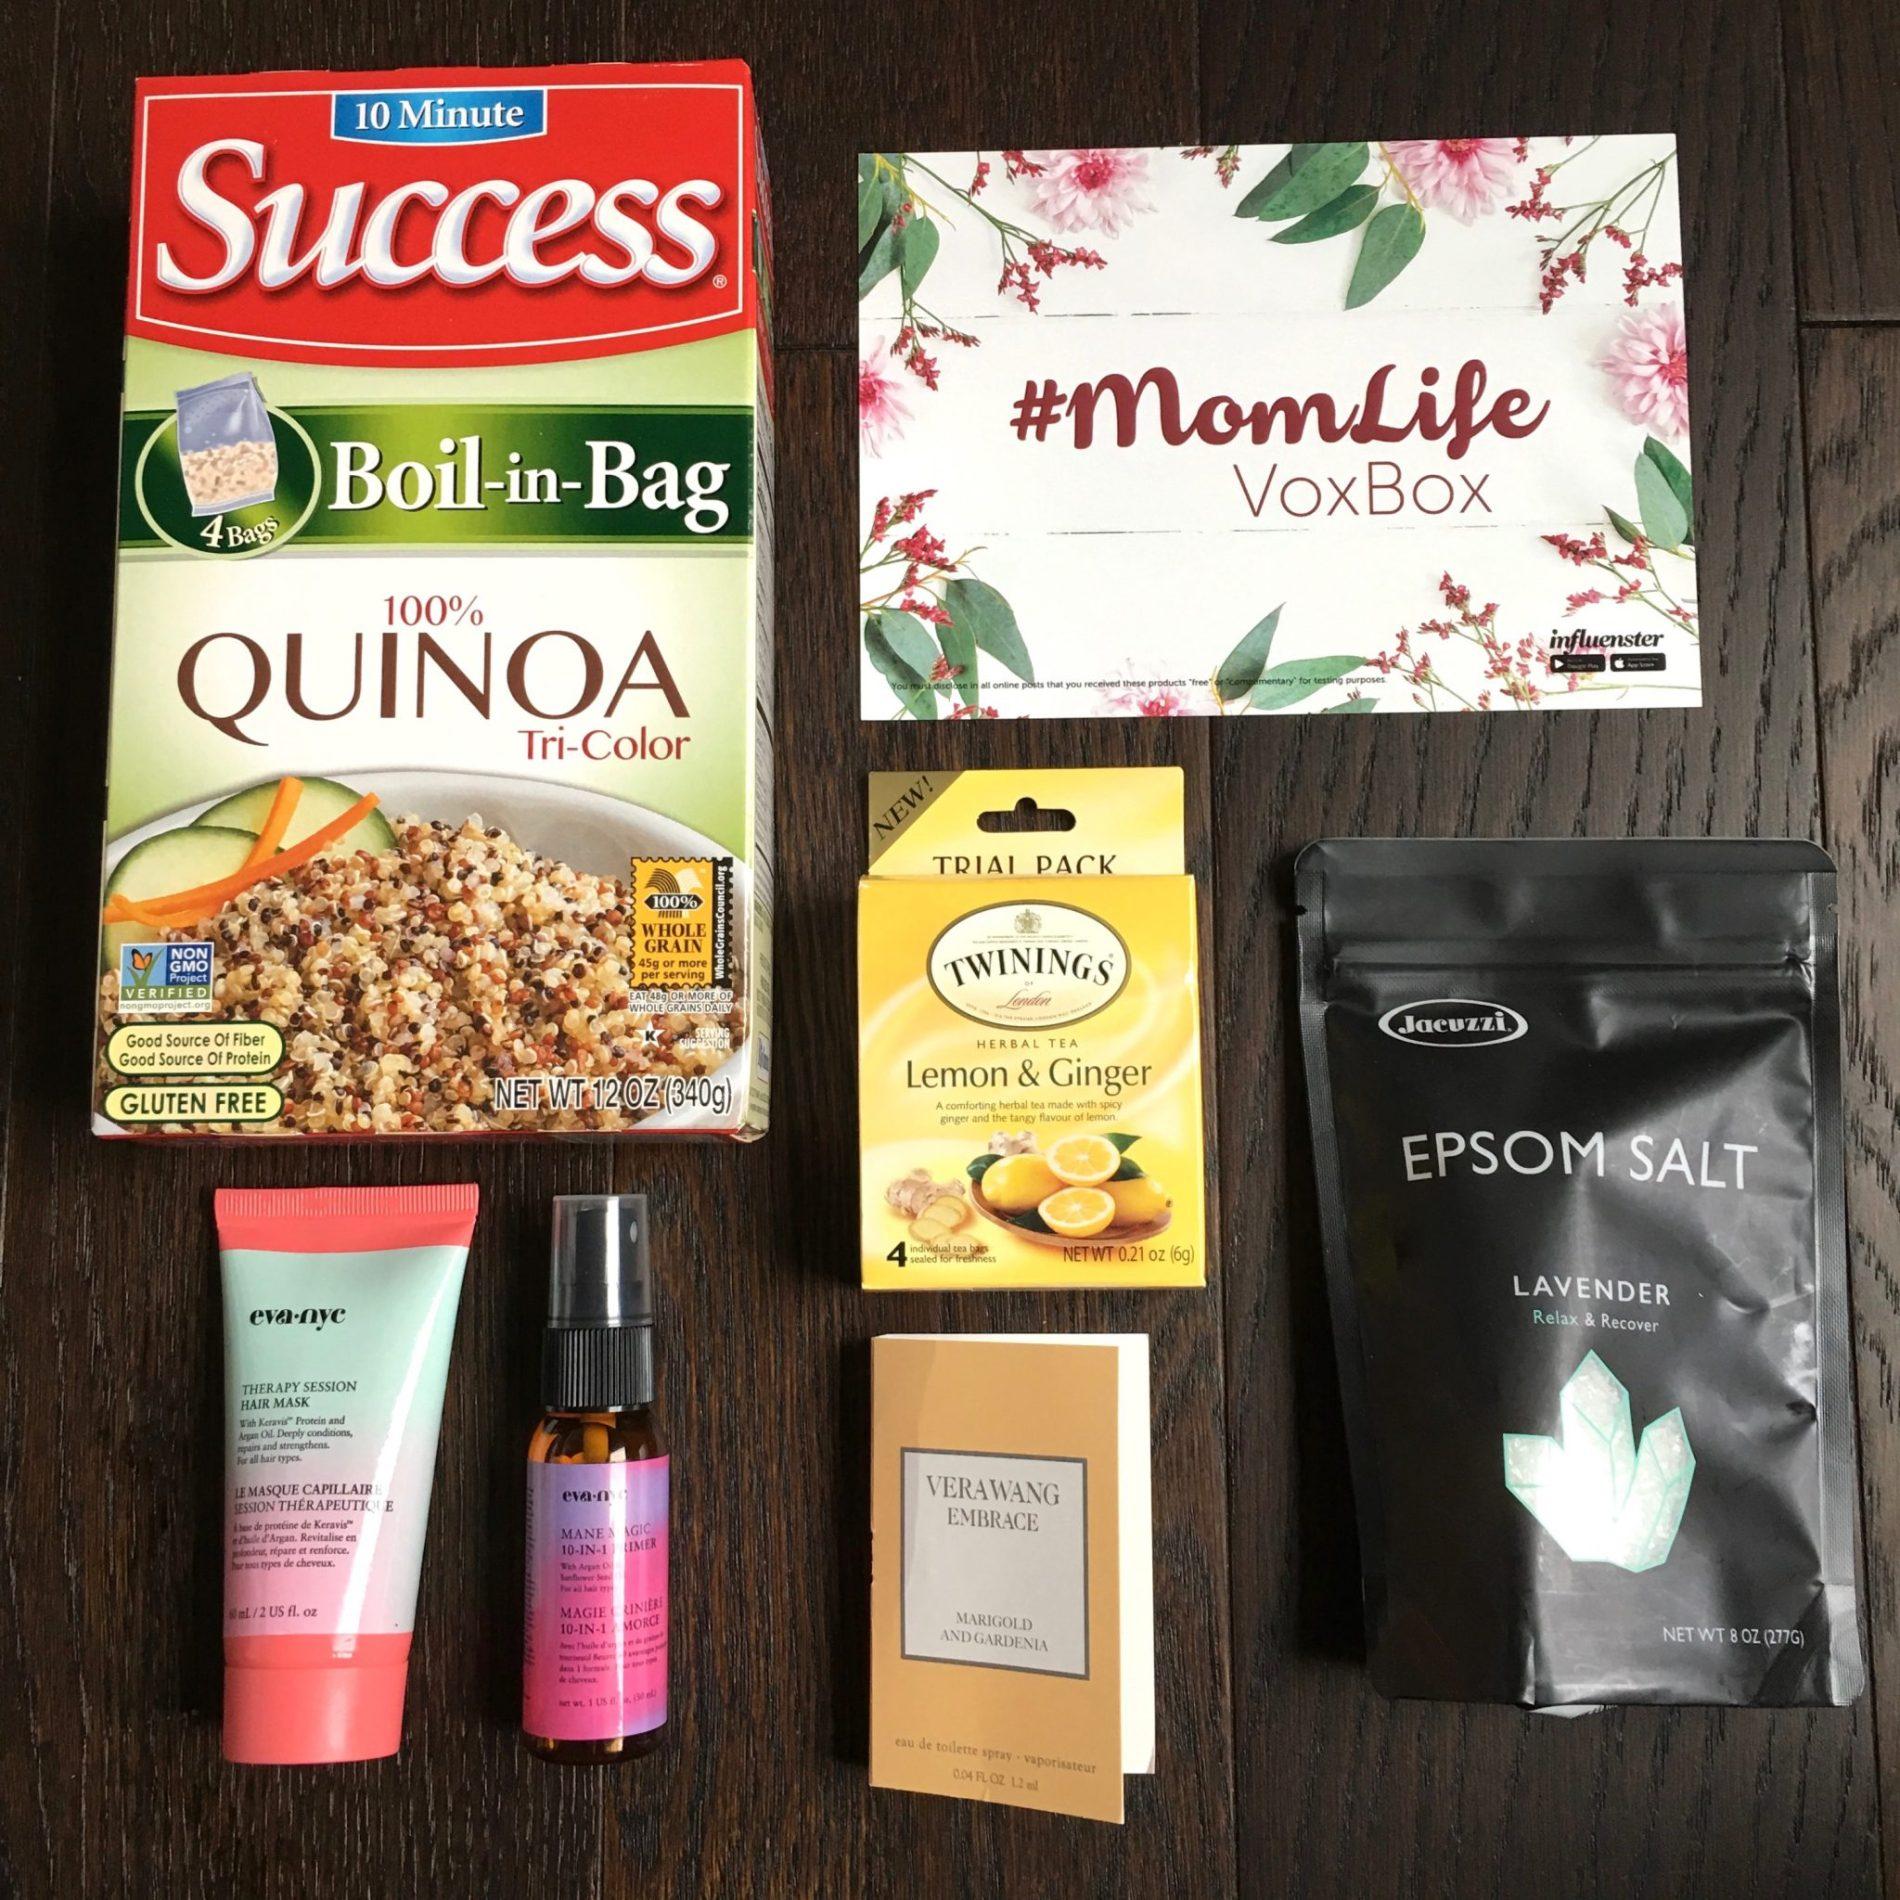 Read more about the article Influenster Mom Life Voxbox Review